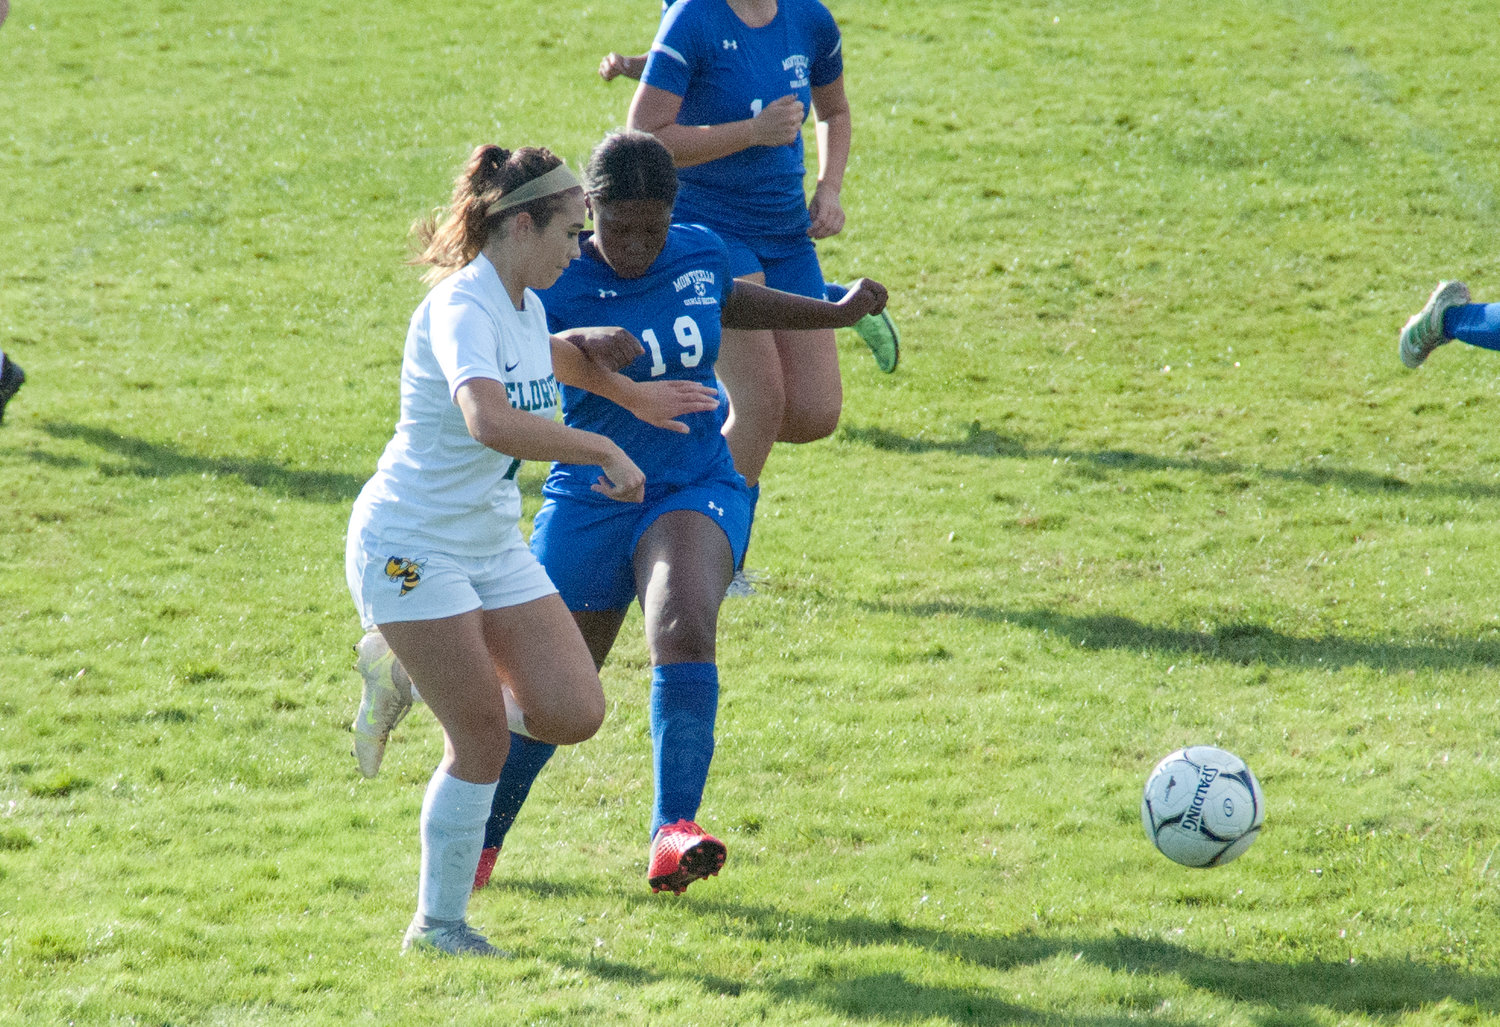 Jailyn LaBuda scored the first goal for the Lady Yellowjackets, but throughout the second half, Lady Panther Holly McFarland’s defensive effort stifled the Eldred strikers.